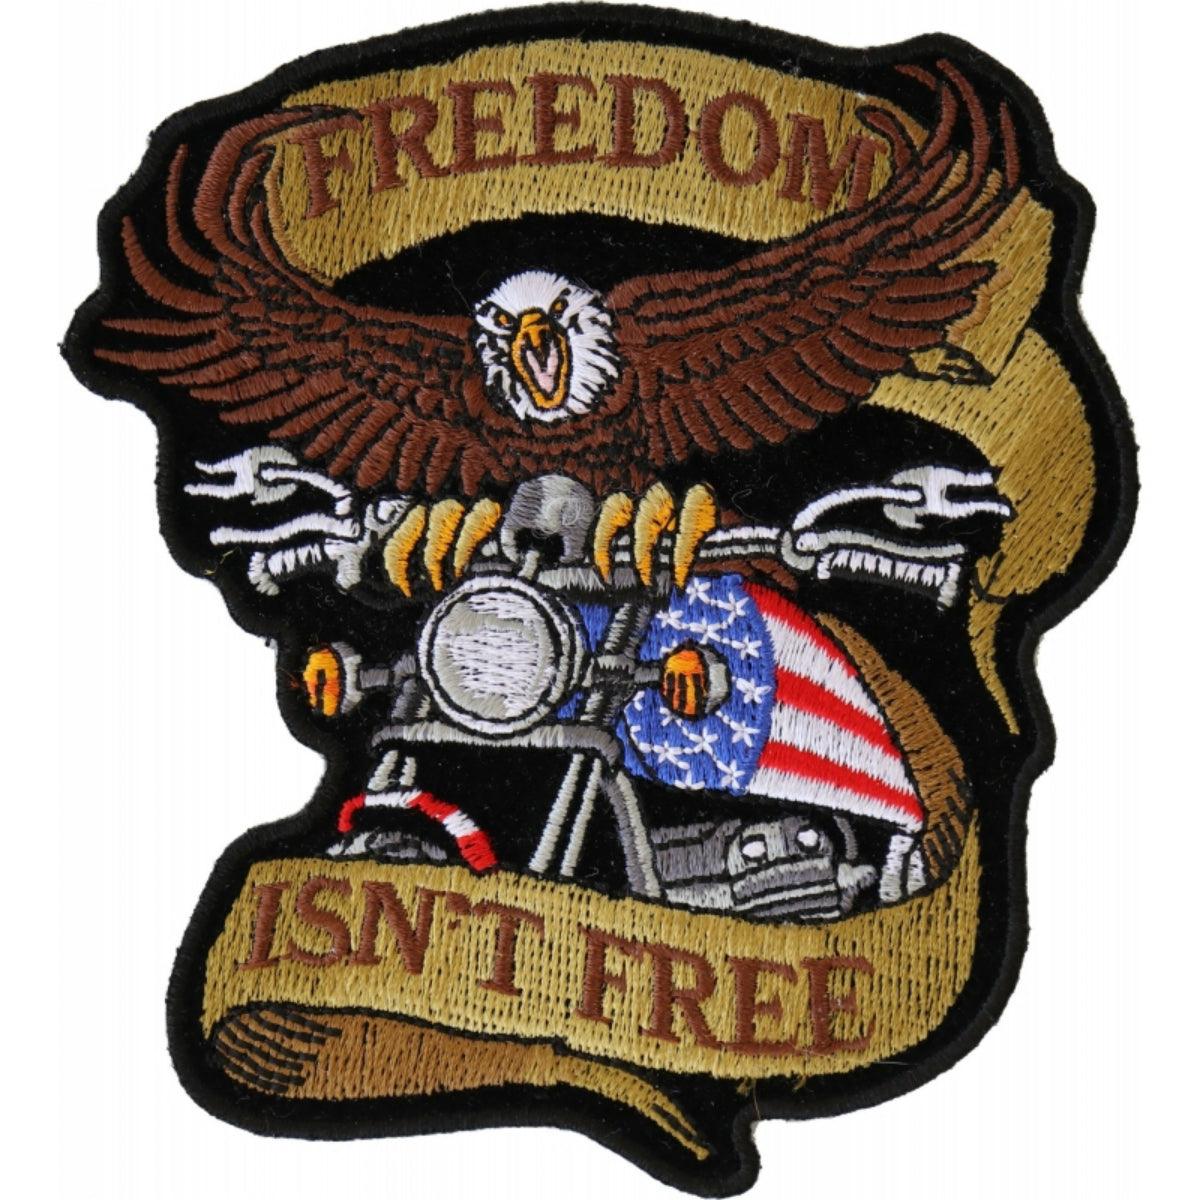 Daniel Smart Freedom Isn't Free, Patriotic Eagle Bike Embroidered Iron On Patch, 3.75 x 4.25 inches - American Legend Rider